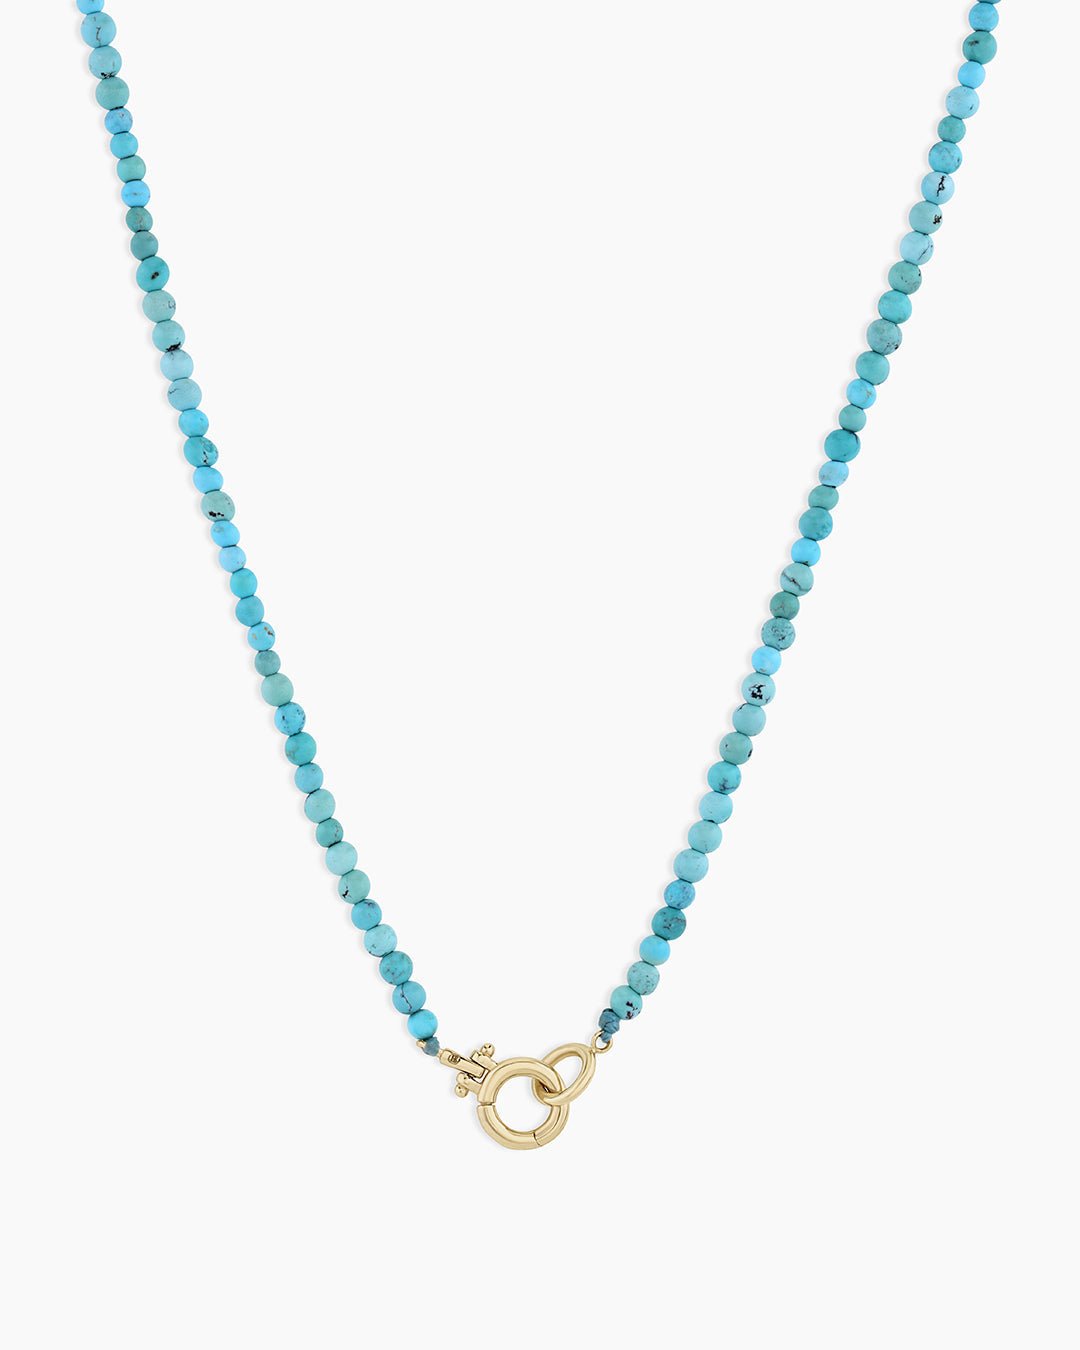 Mini Turquoise Necklace || option::14k Solid Gold